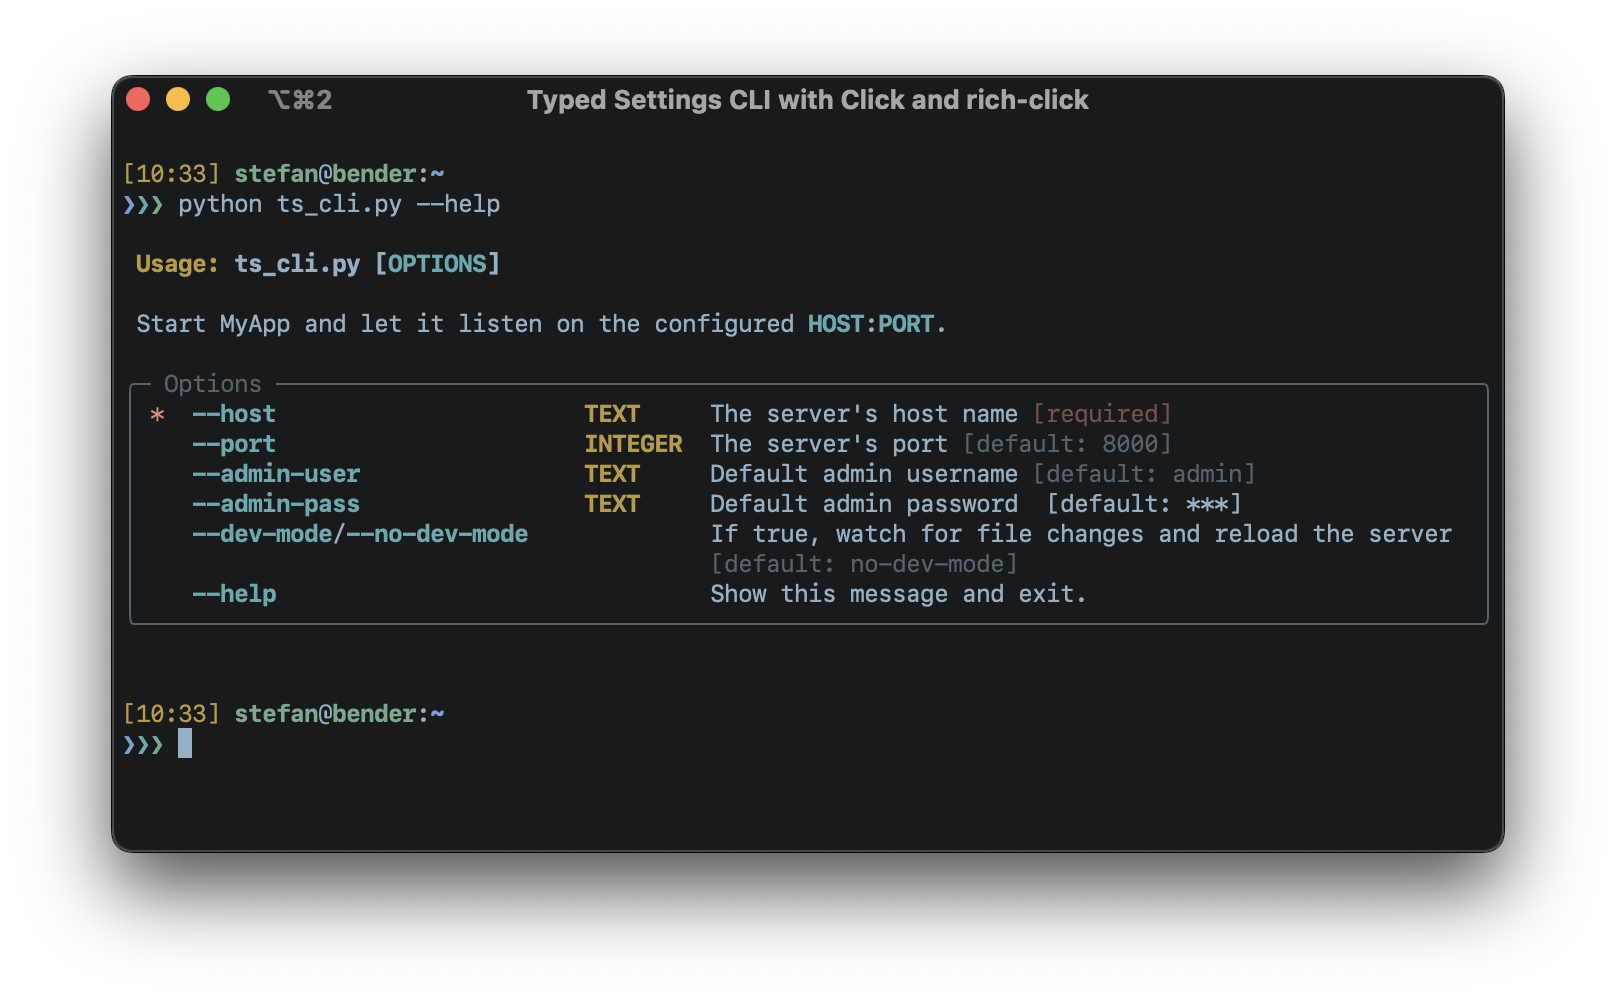 "--help" output of a "Click" based Typed Settings CLI with "rich-click" styling